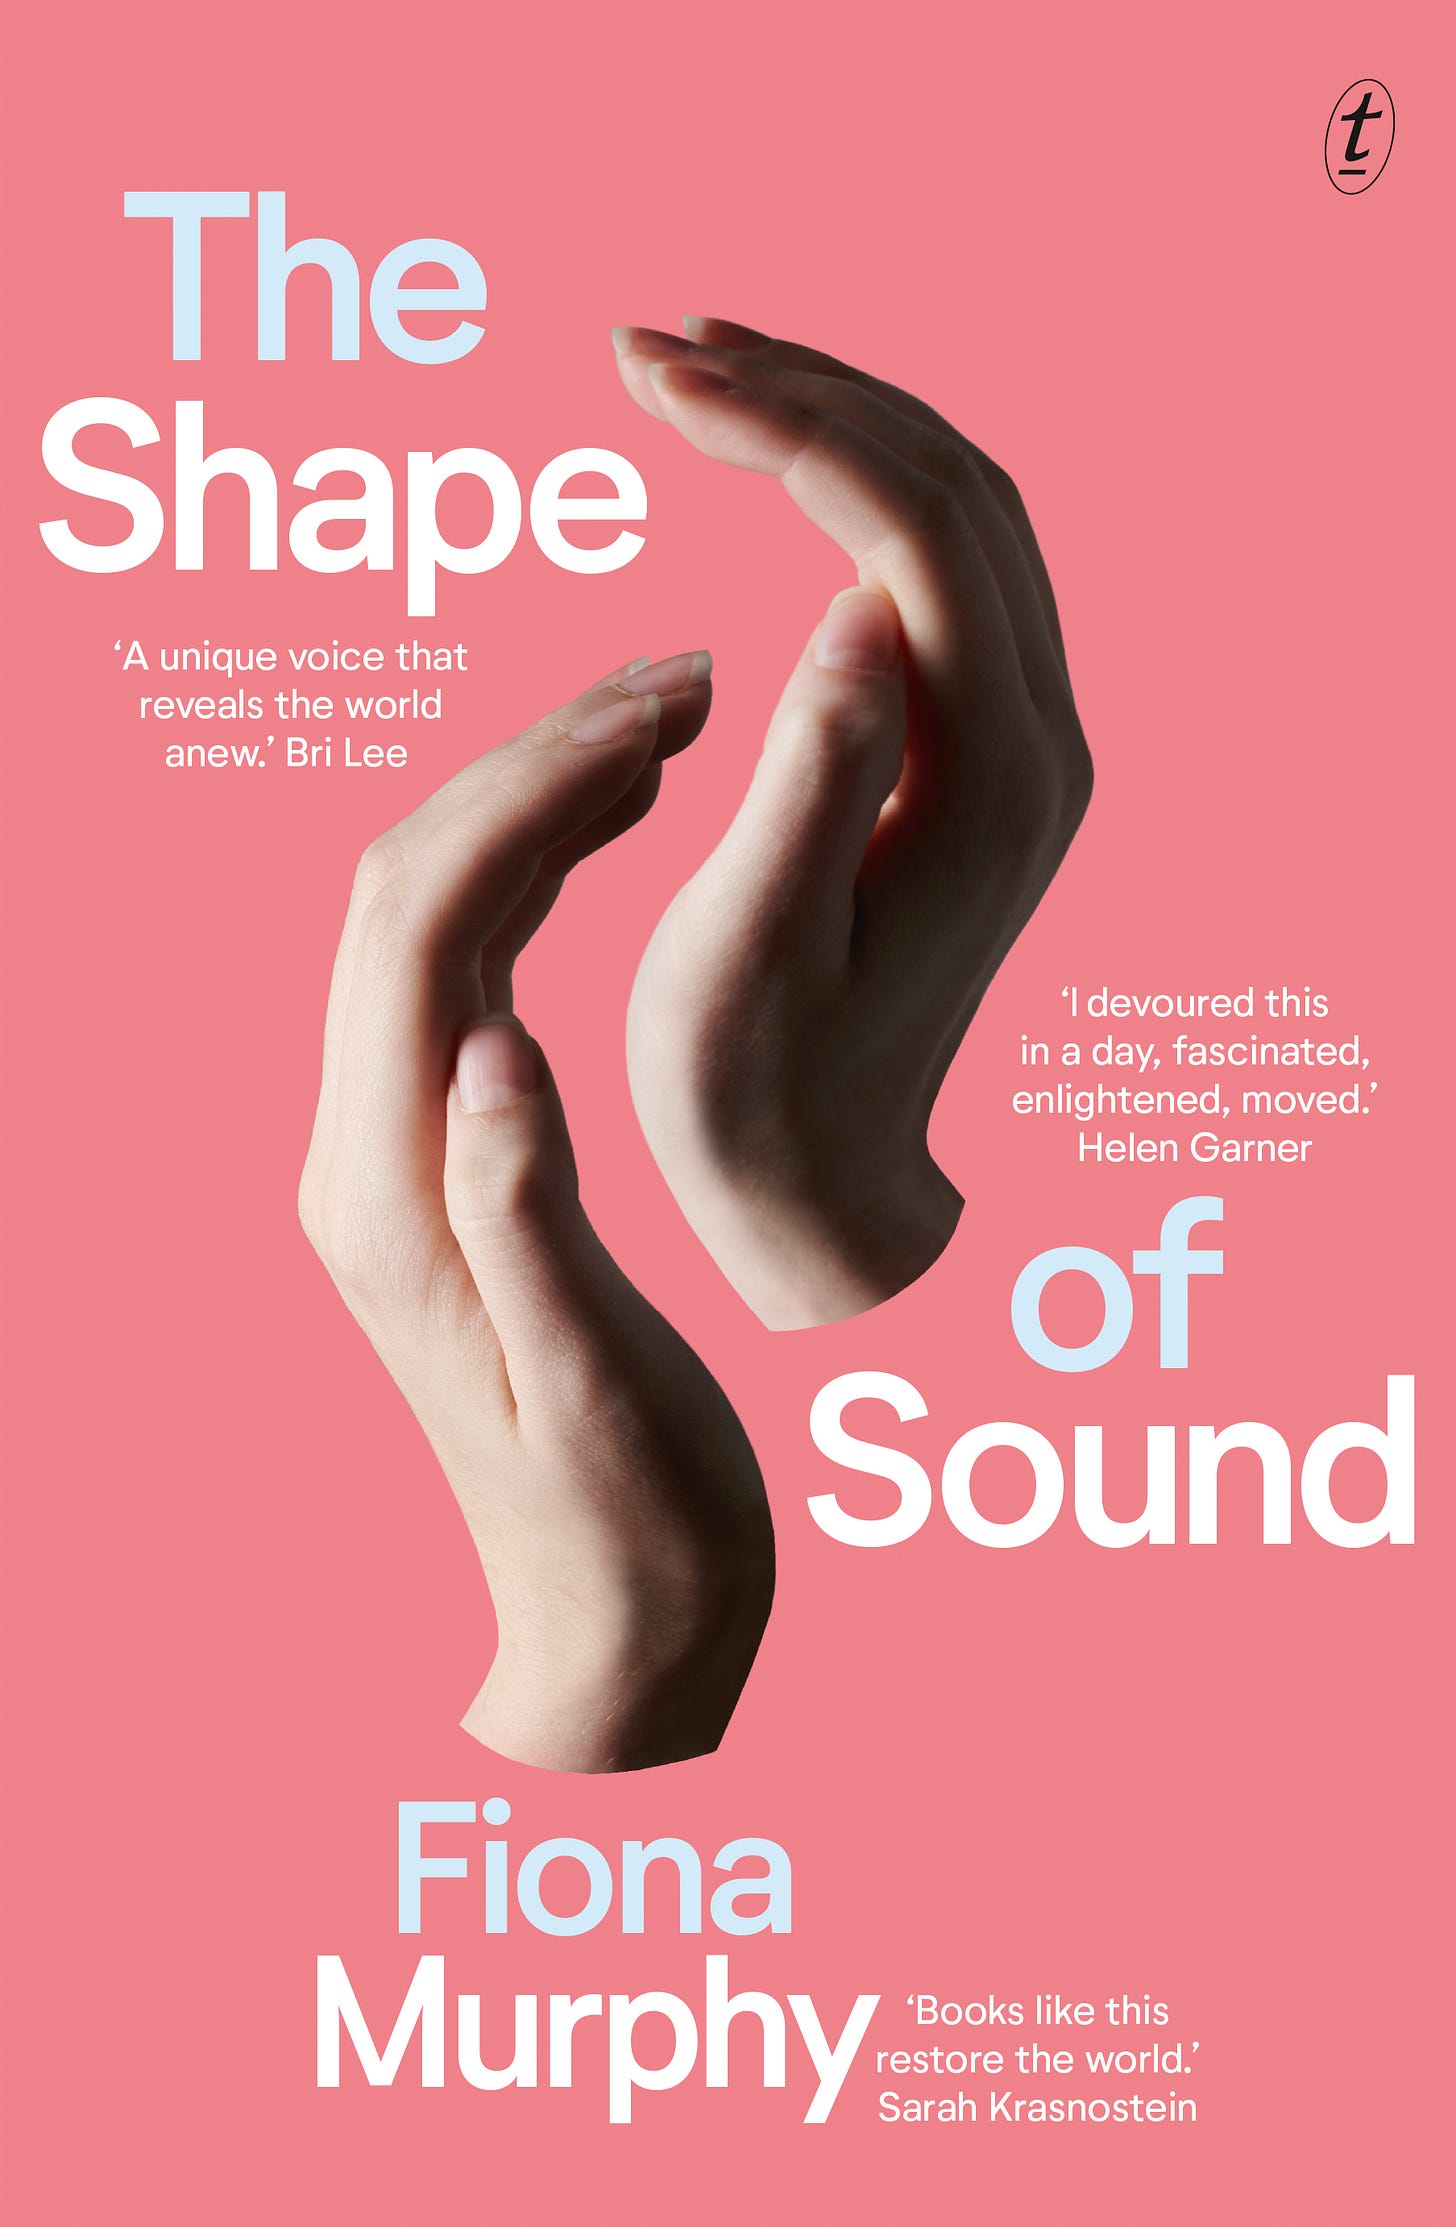 The cover of the book 'The Shape of Sound' by Fiona Murphy. The cover is a salmon colour with two hands on it